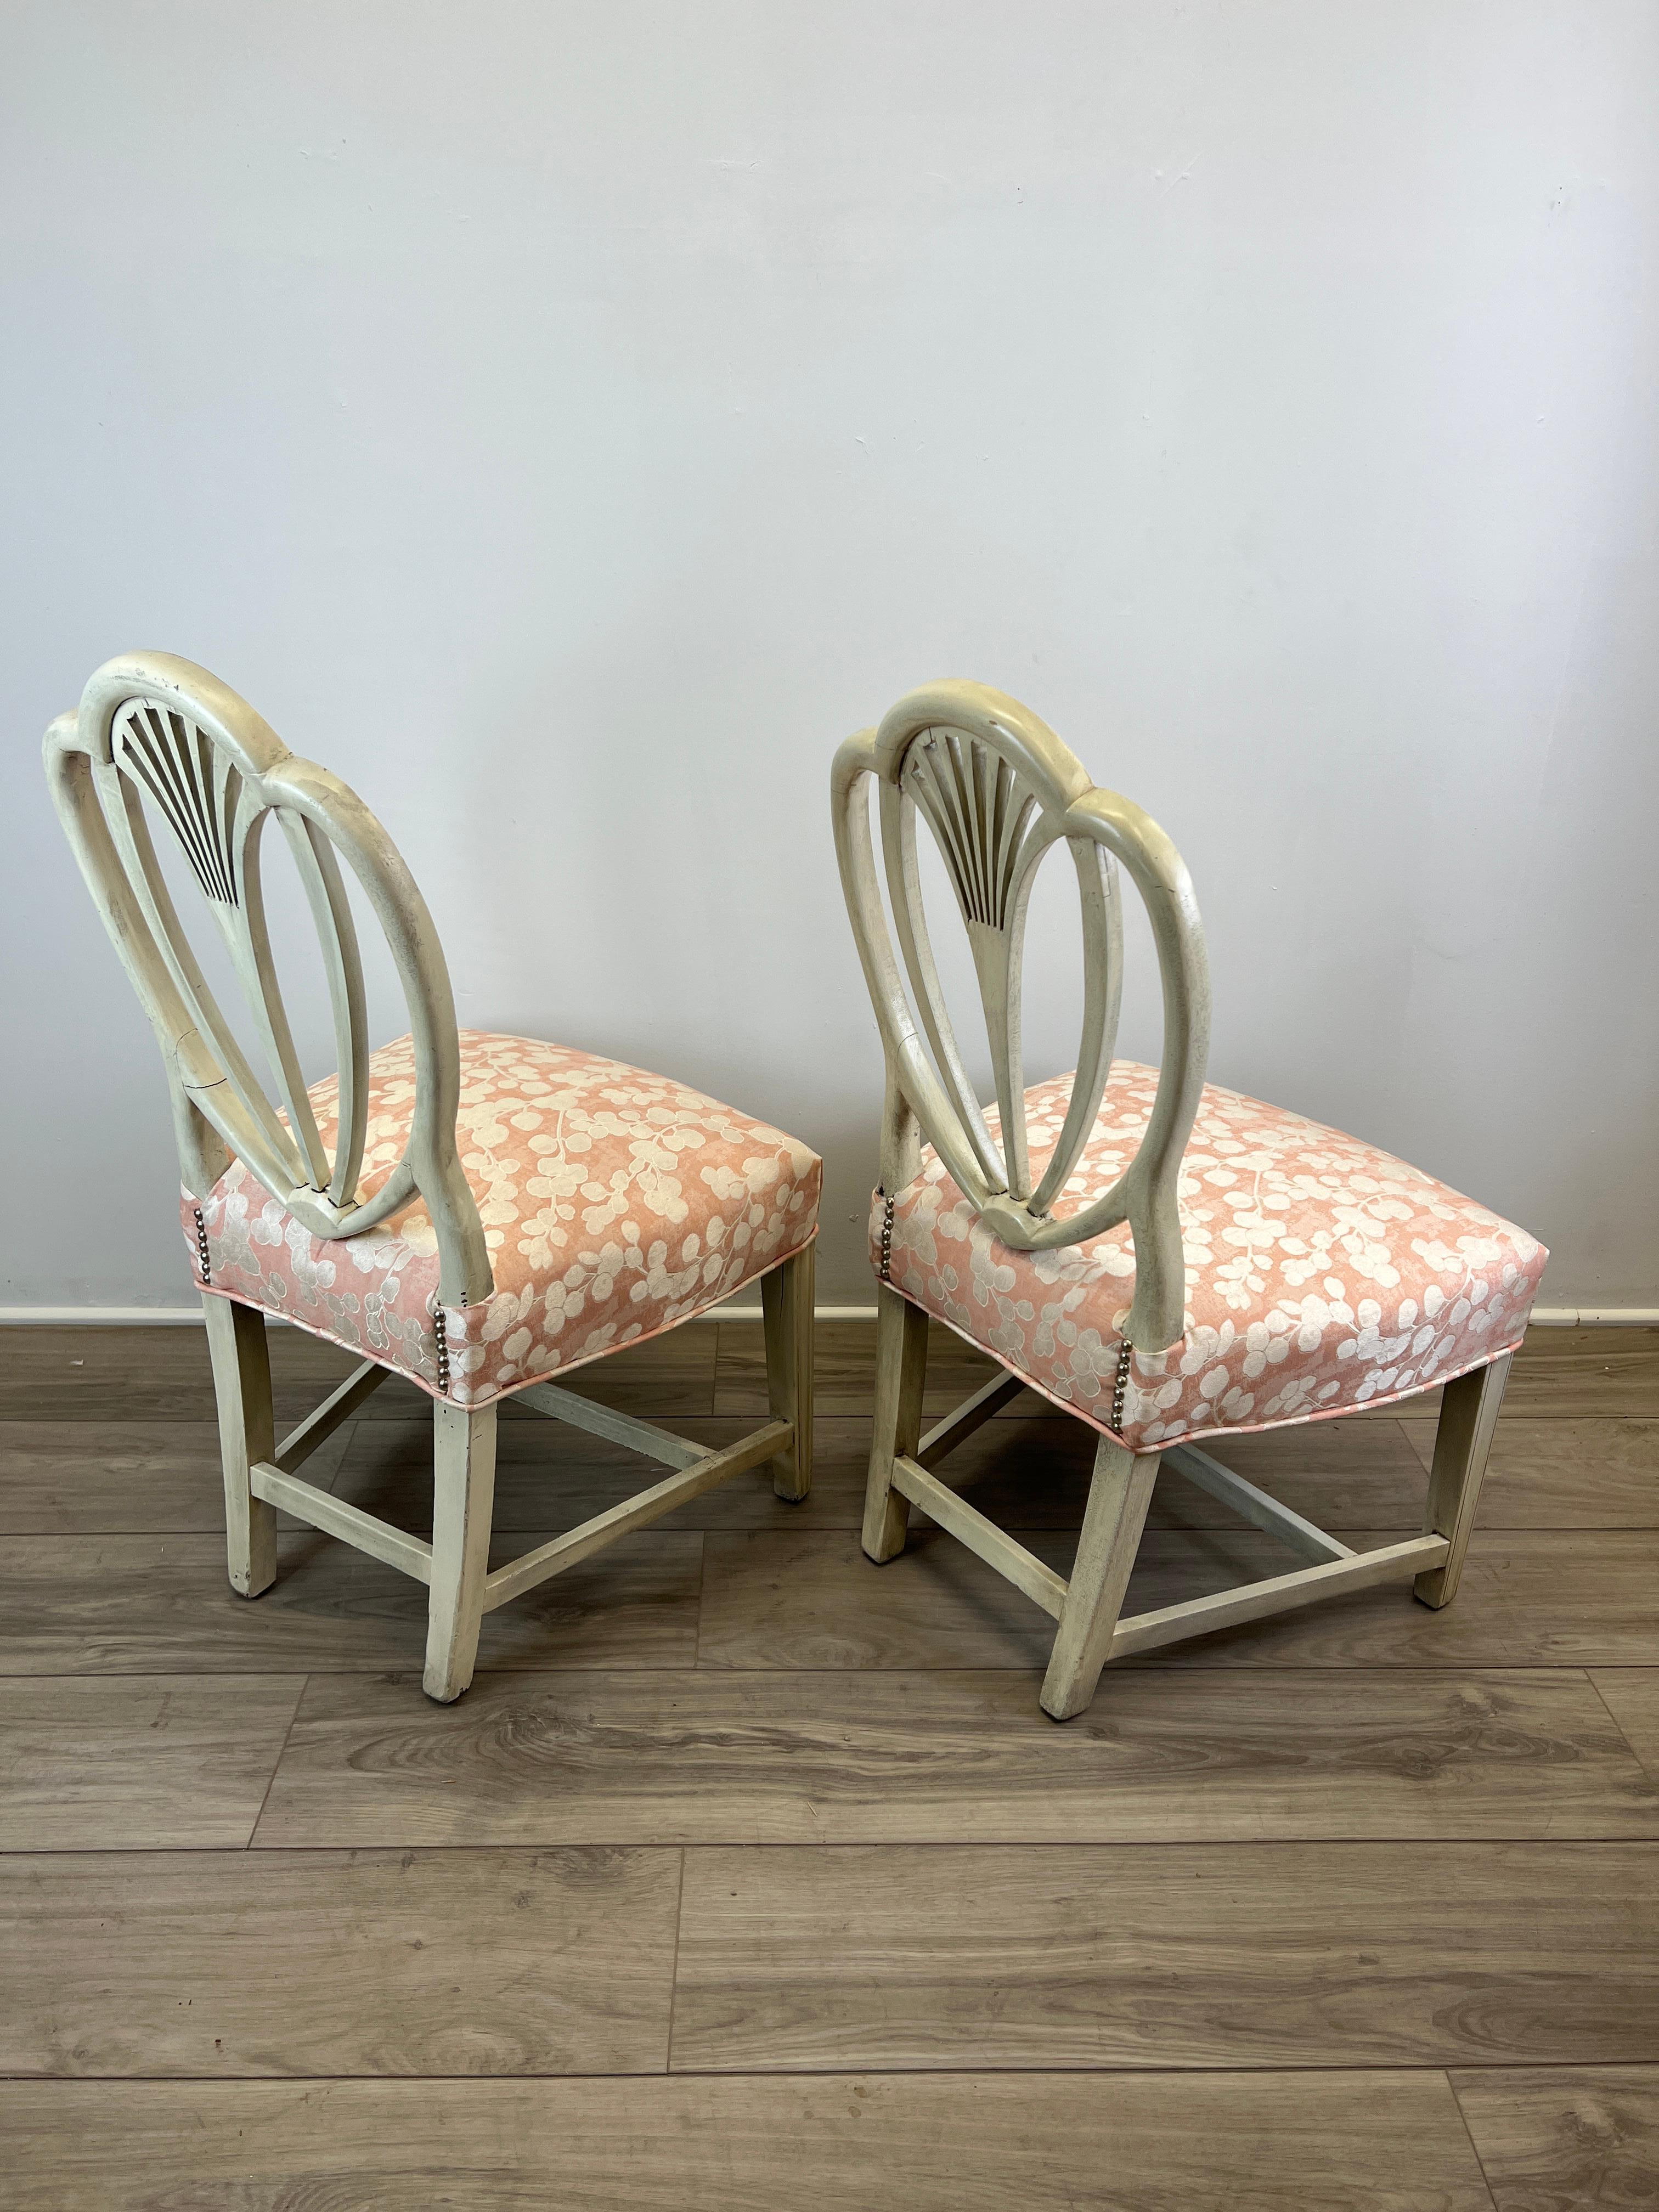 Pair of 18th Century American Mid-Atlantic Hepplewhite Arched Back Side Chairs For Sale 5